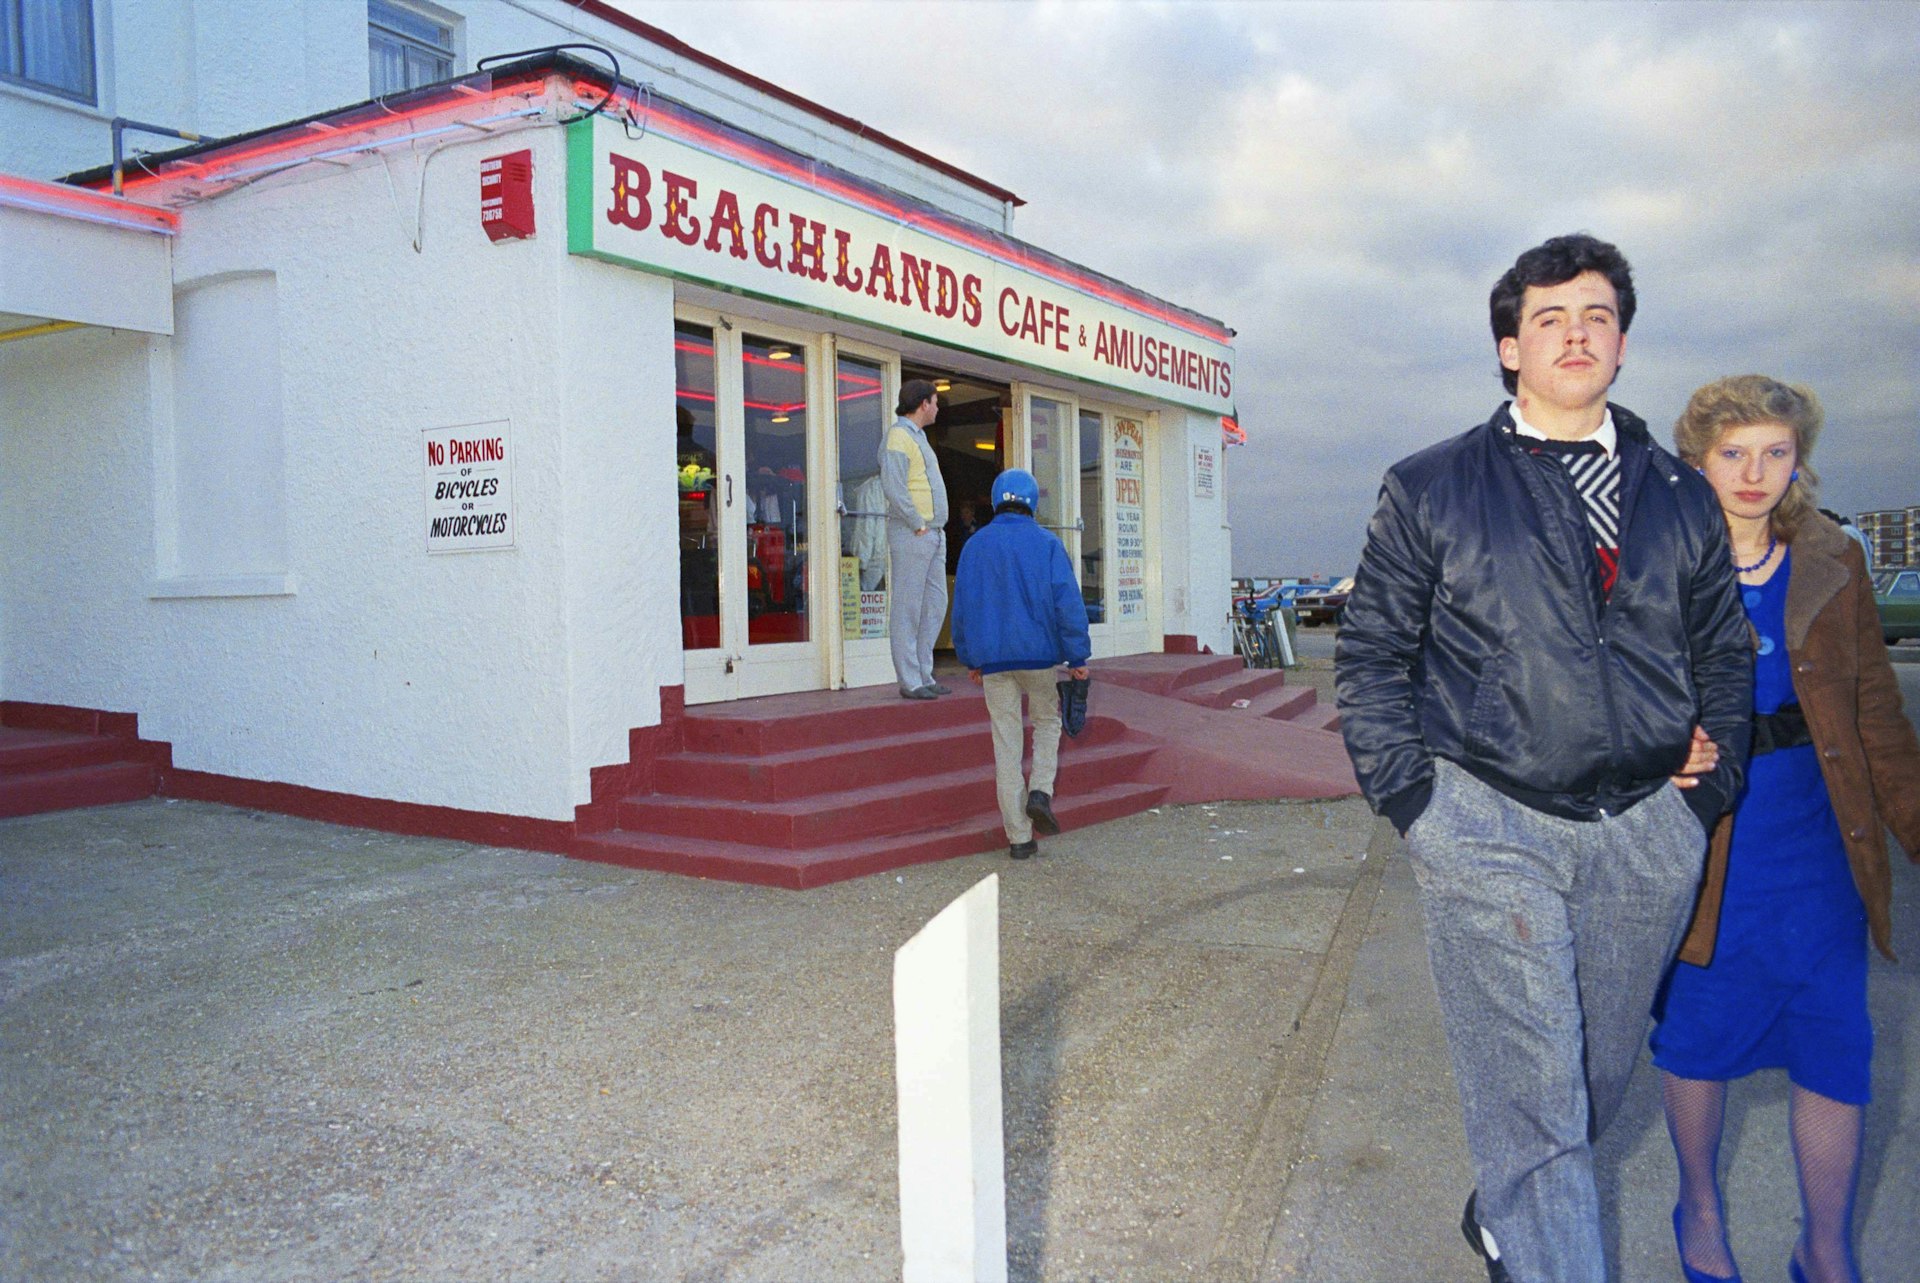 A photographic tribute to the British seaside